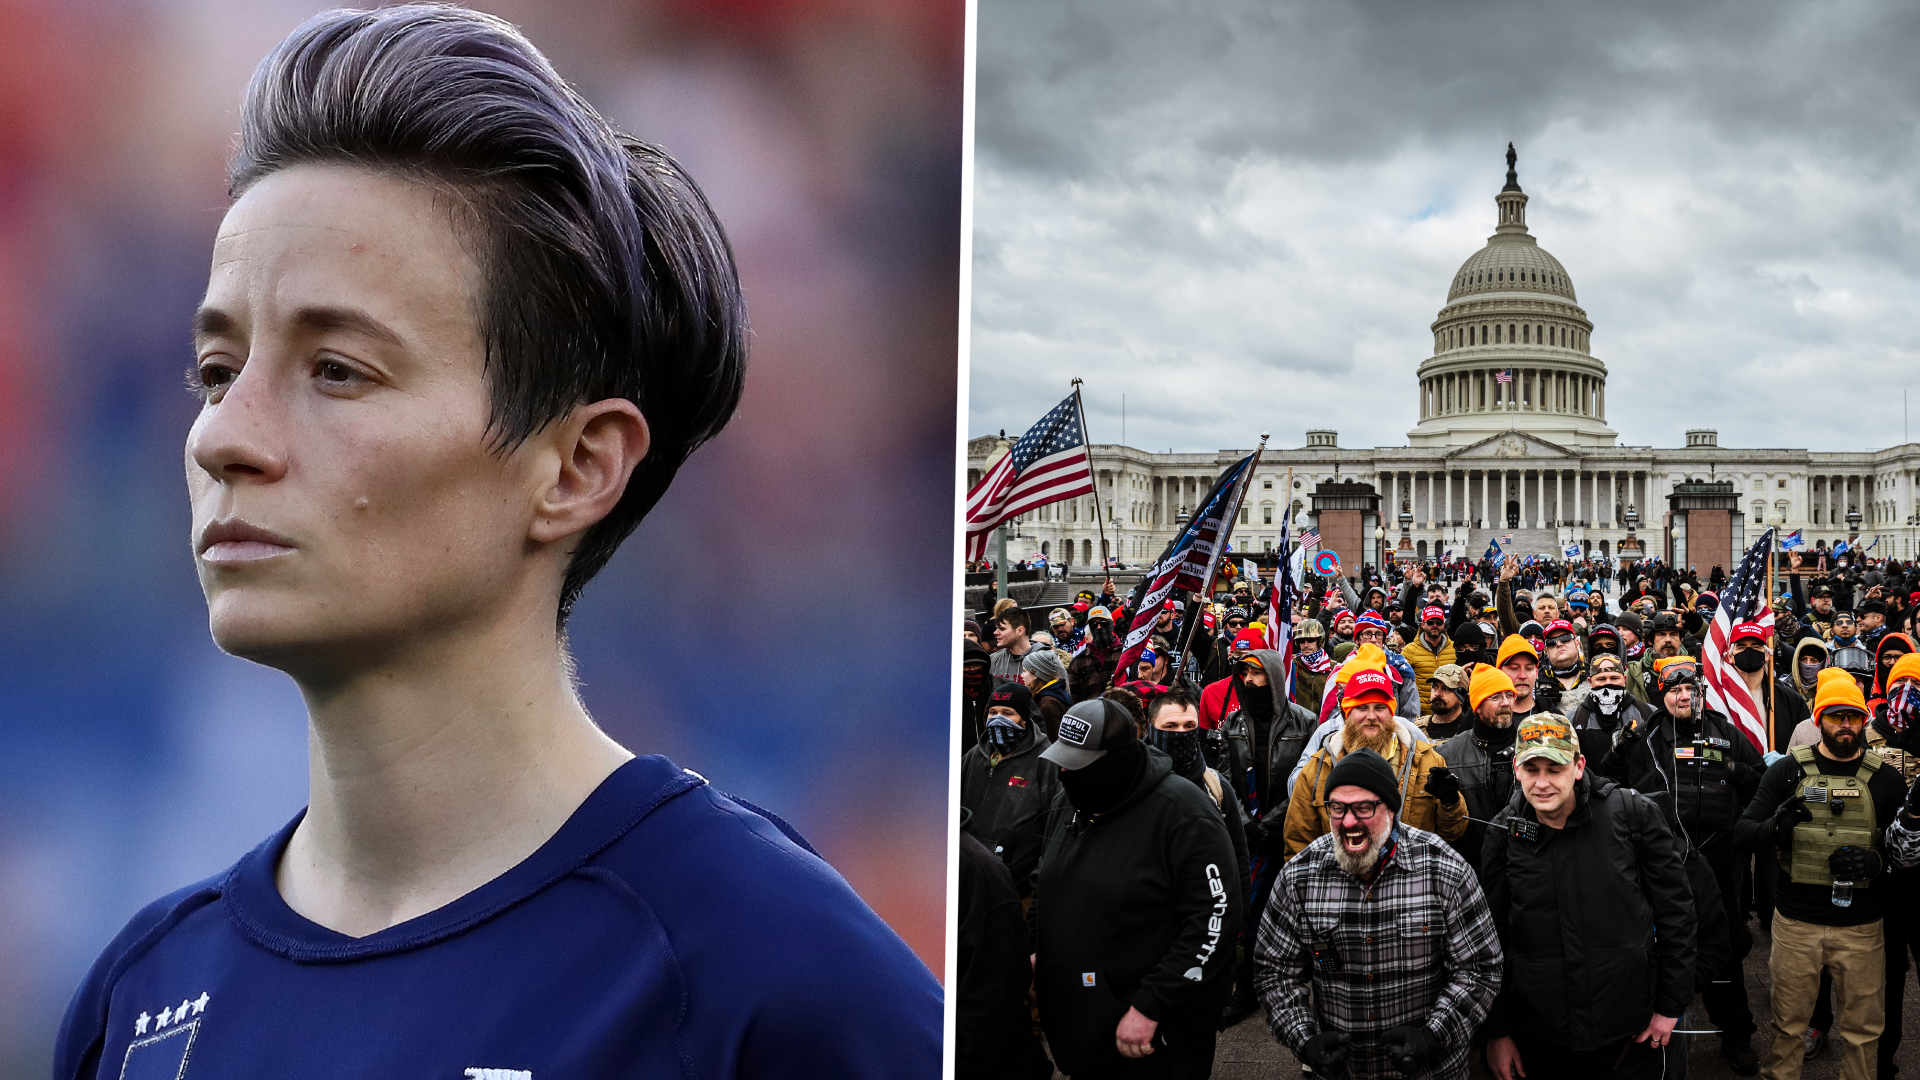 Trump incited 'white supremacist mob' to carry out 'deadly insurrection' at U.S. Capitol, says USWNT star Rapinoe